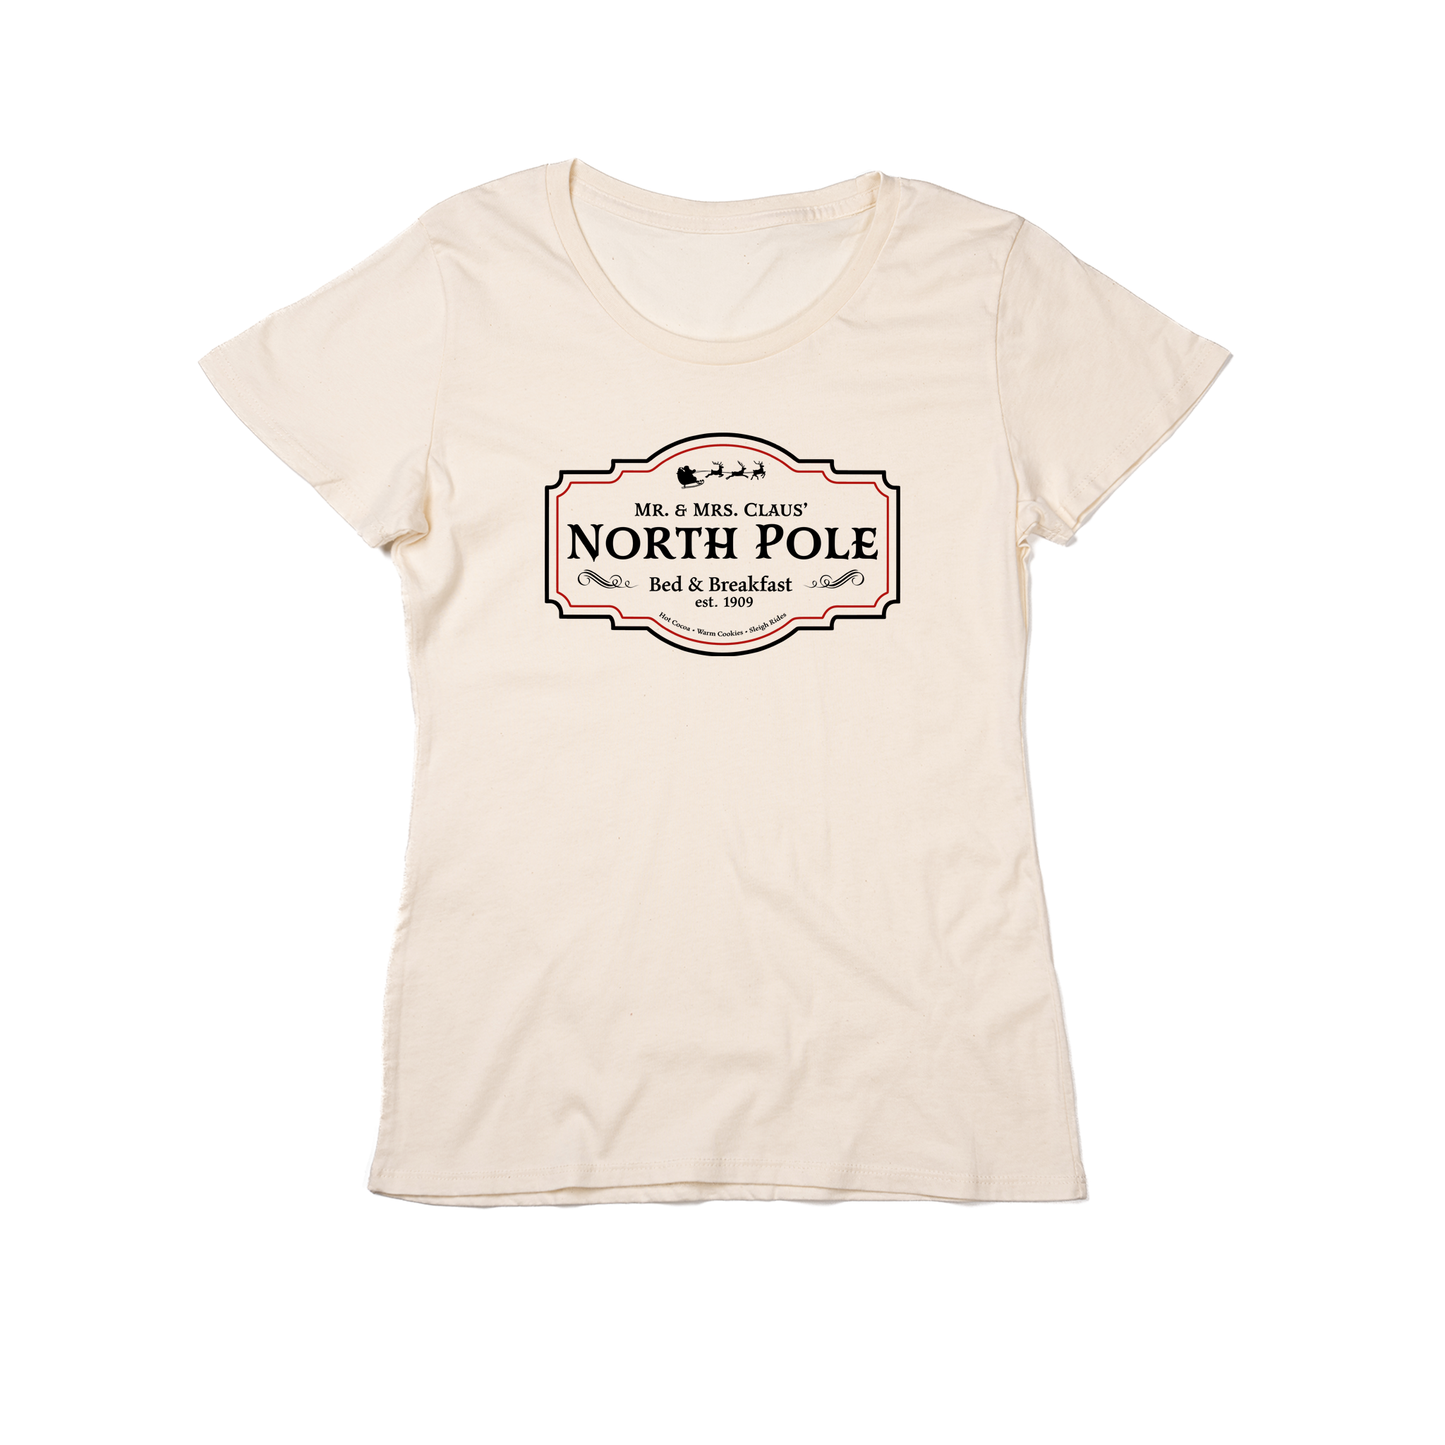 North Pole Bed & Breakfast - Women's Fitted Tee (Natural)